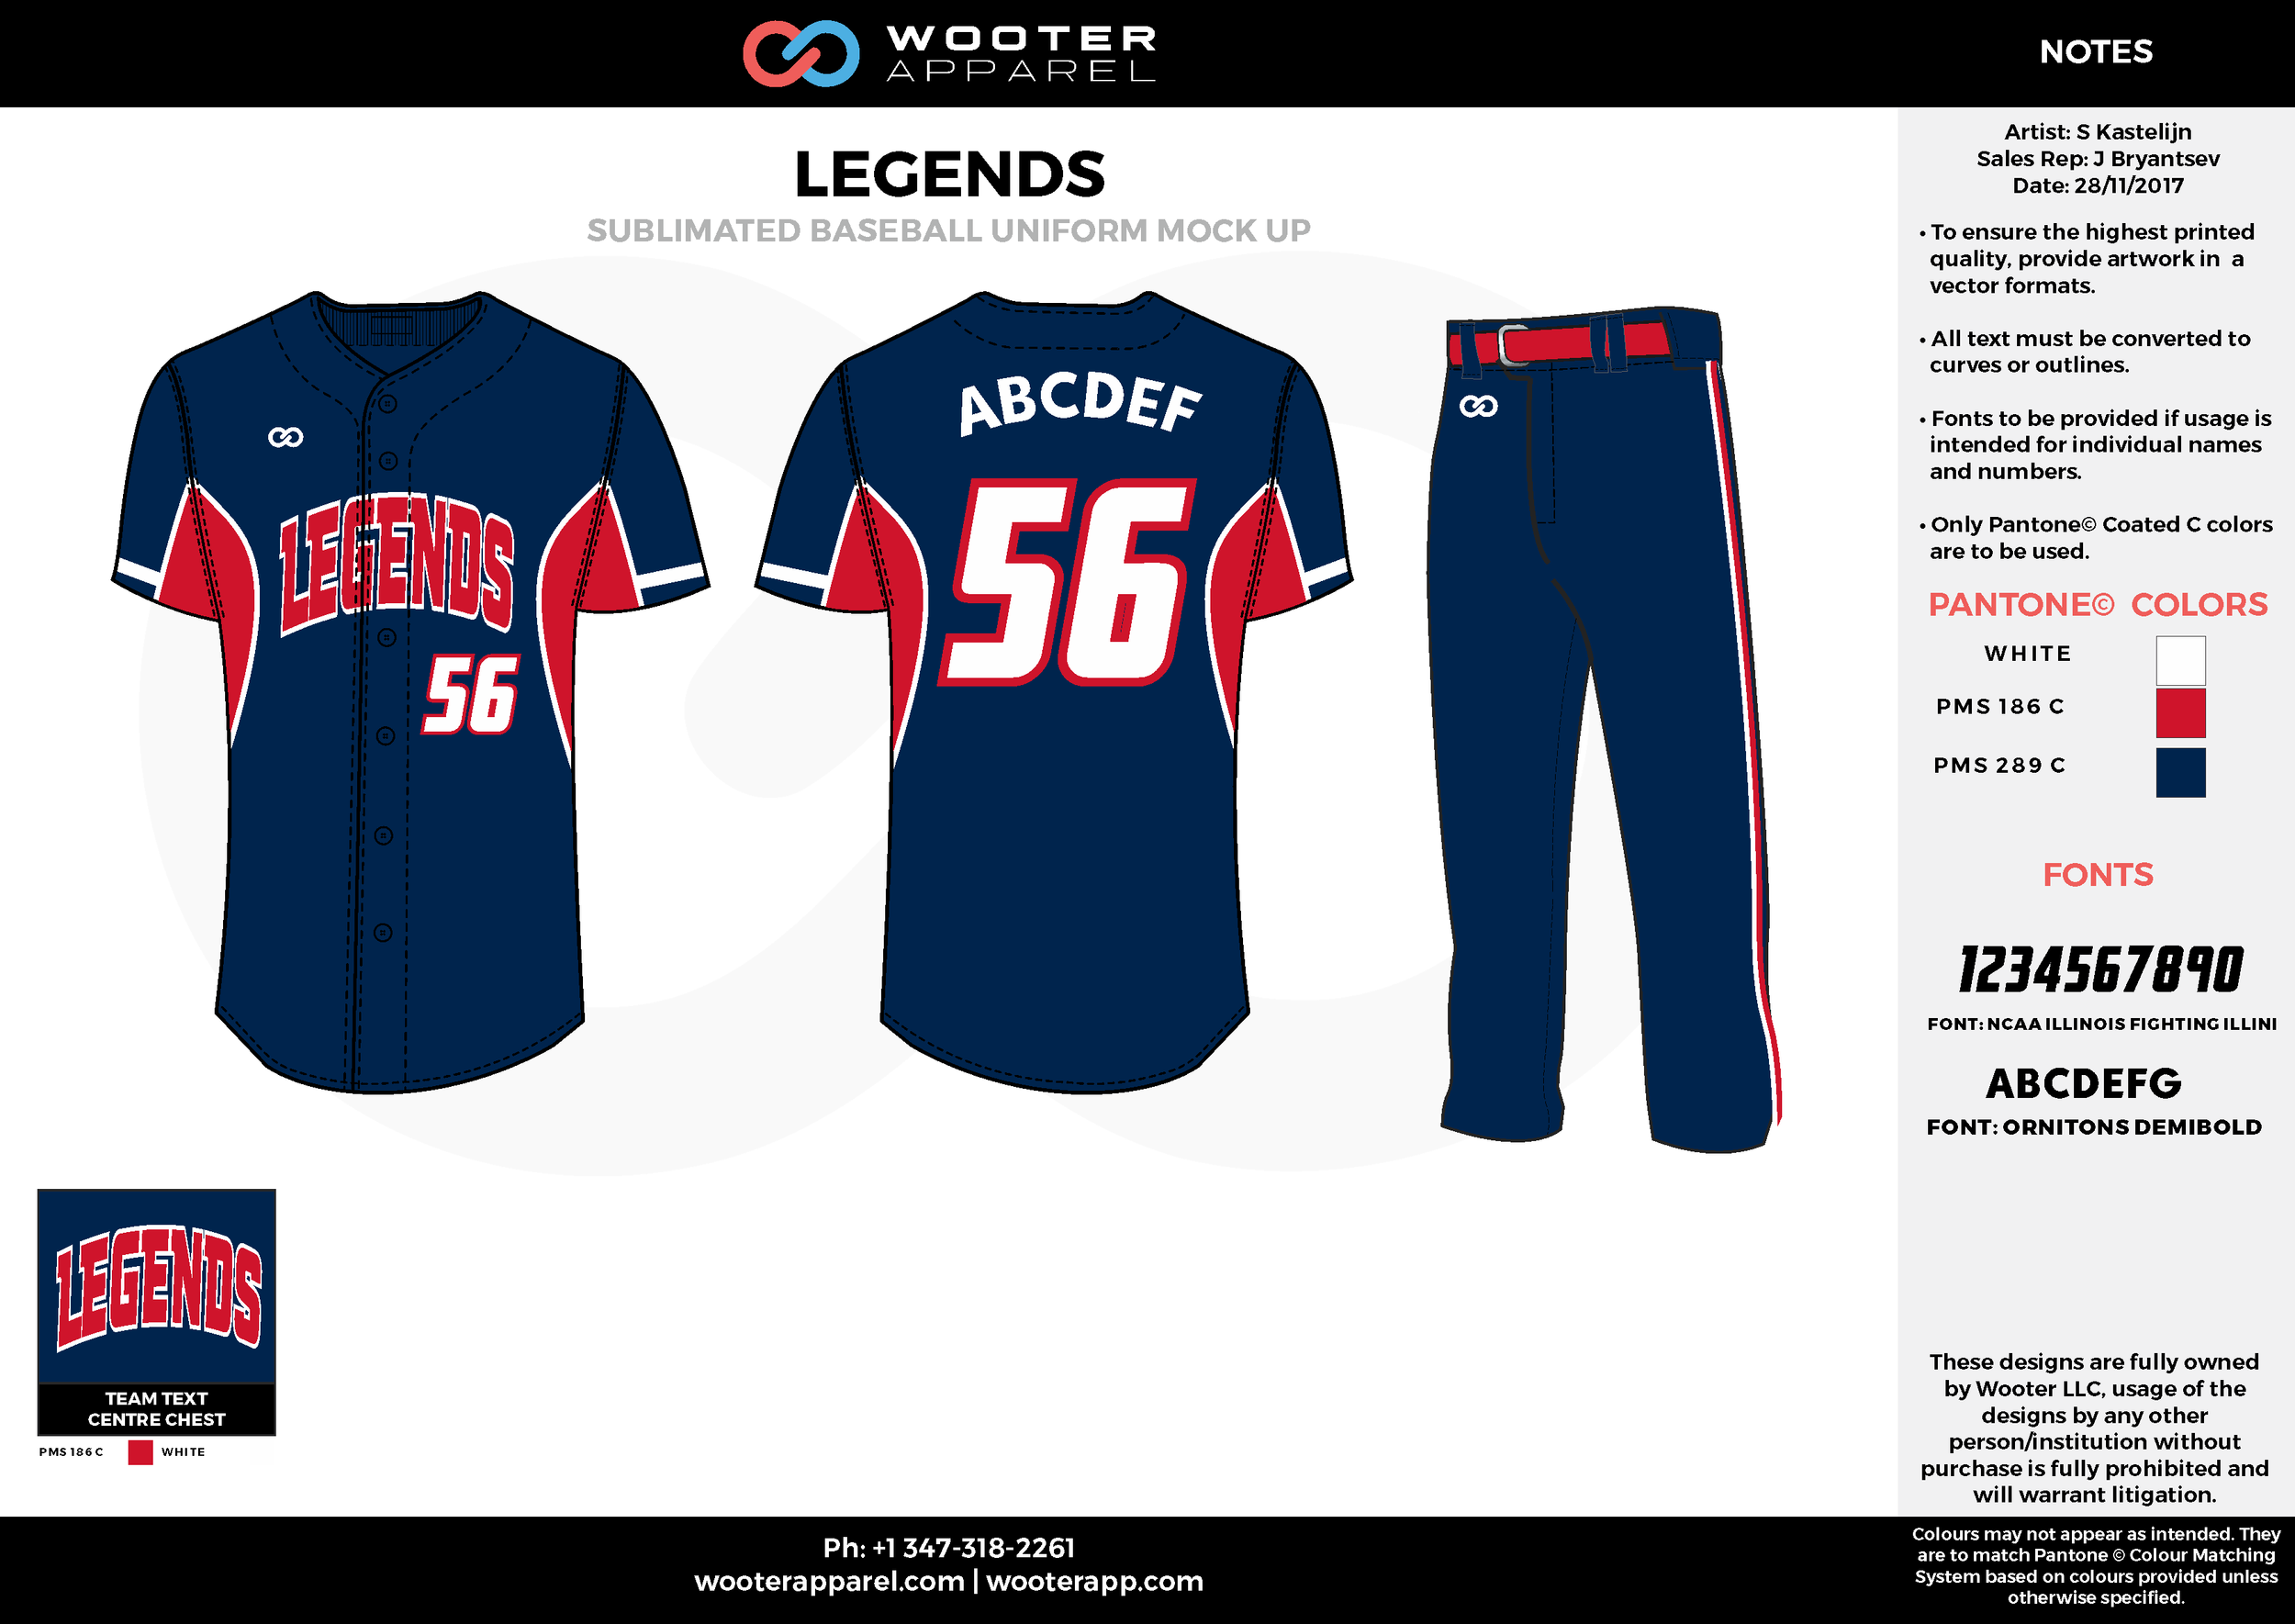 blue and red baseball jersey